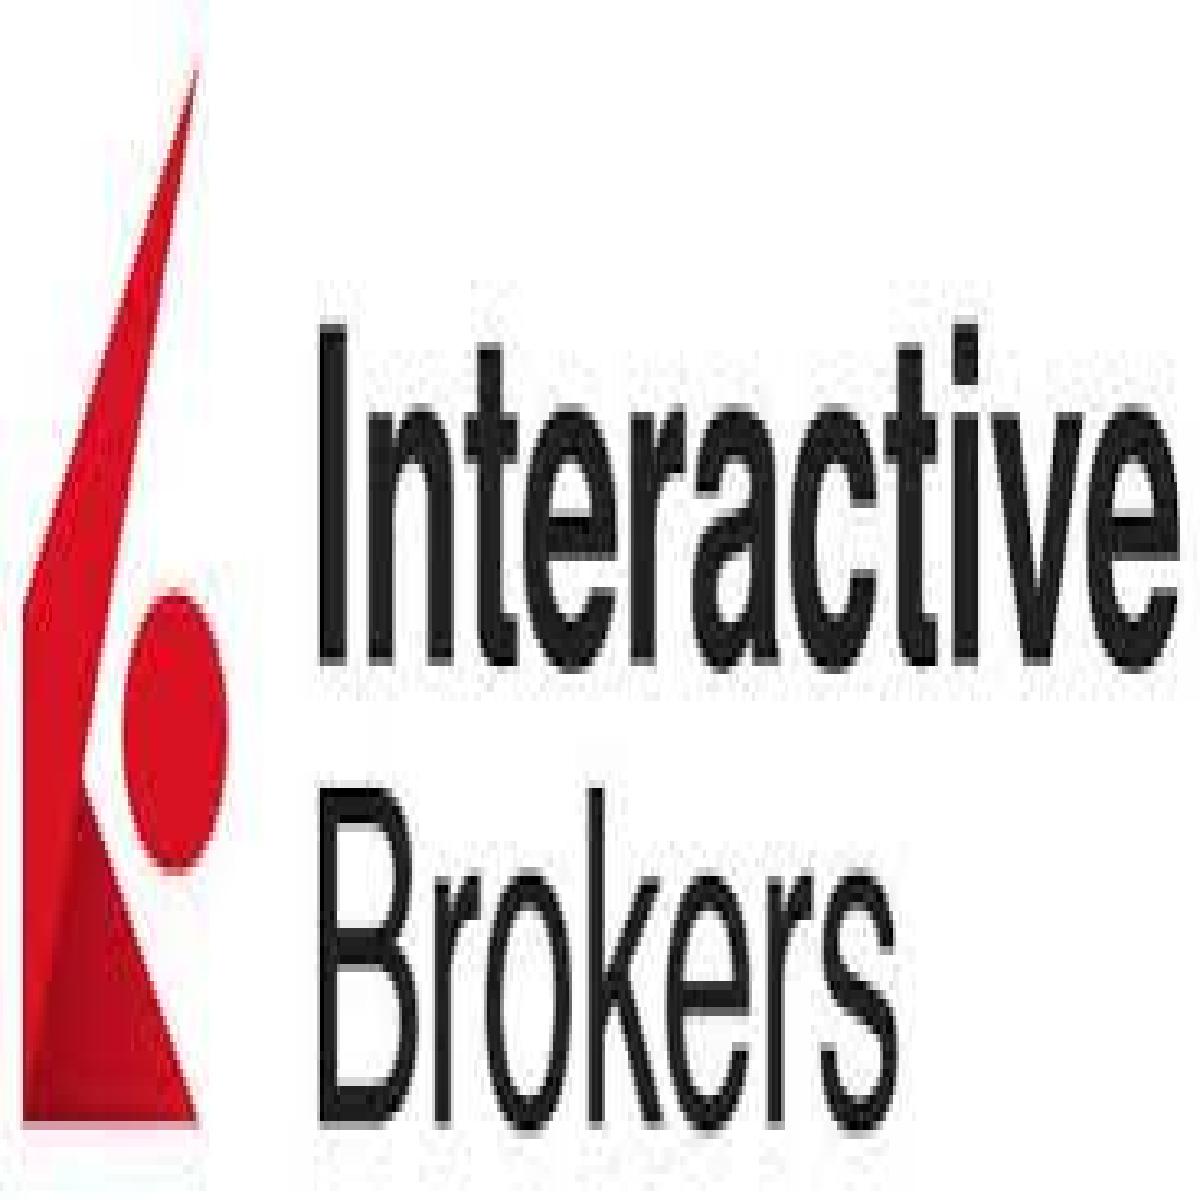 Interactive Brokers Launches Overnight Trading Hours for US ETFs